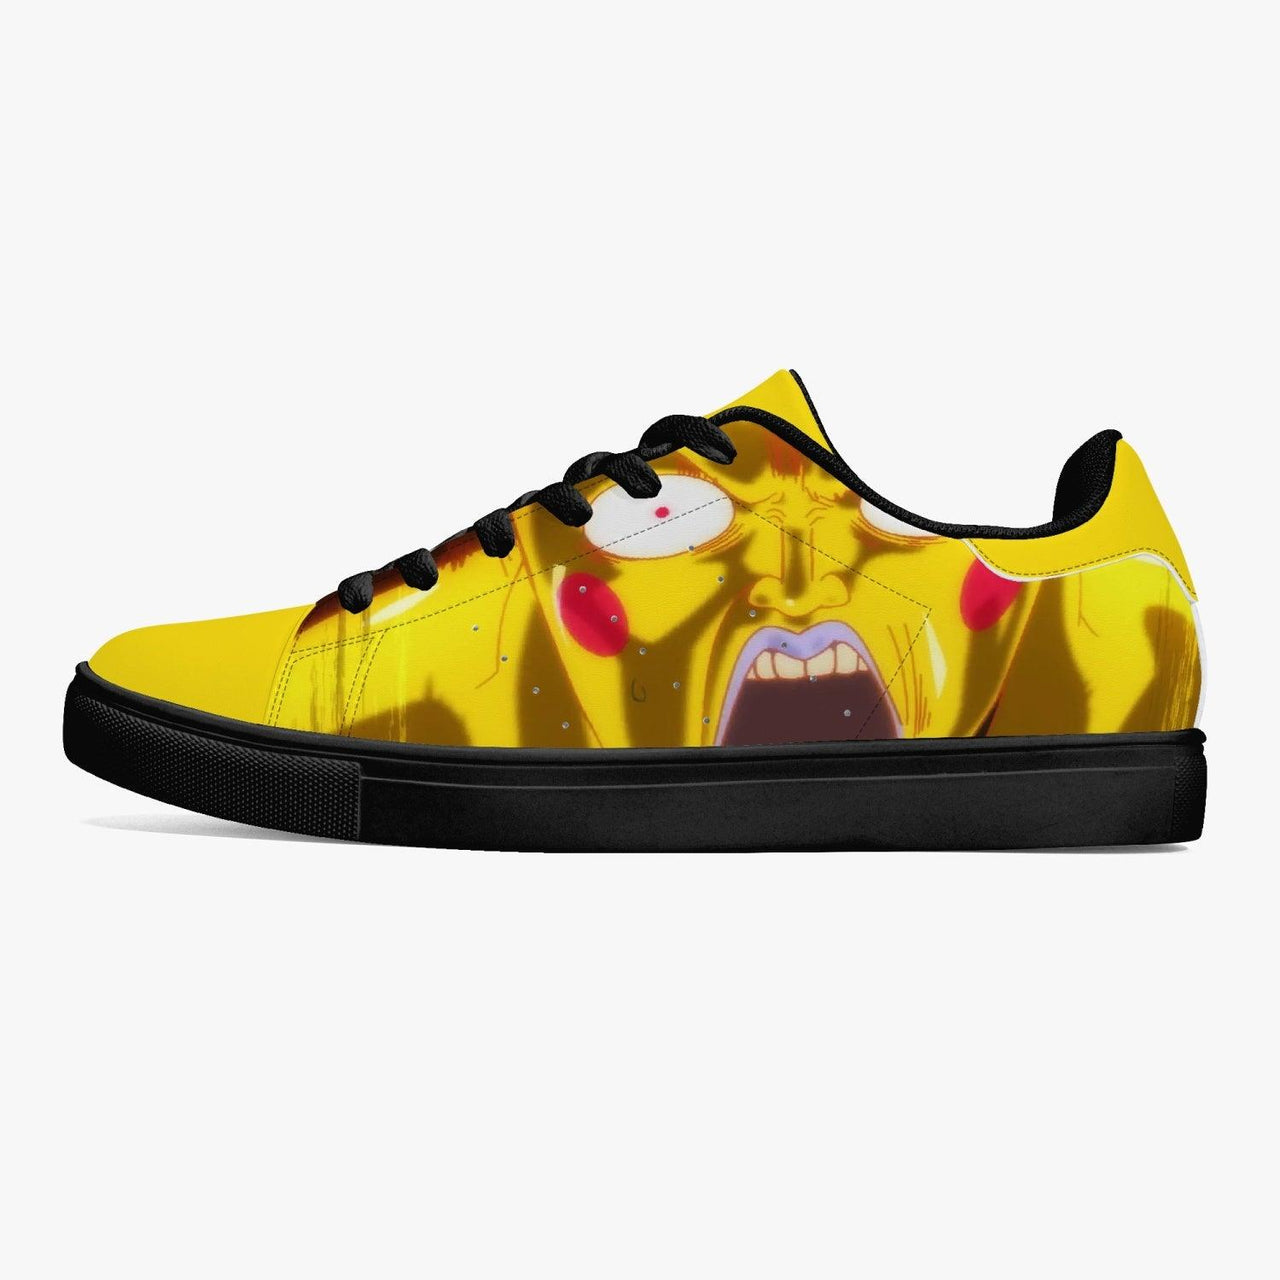 Mob Psycho 100 Golden Dimple Skate Anime Shoes _ Mob Psycho 100 _ Ayuko